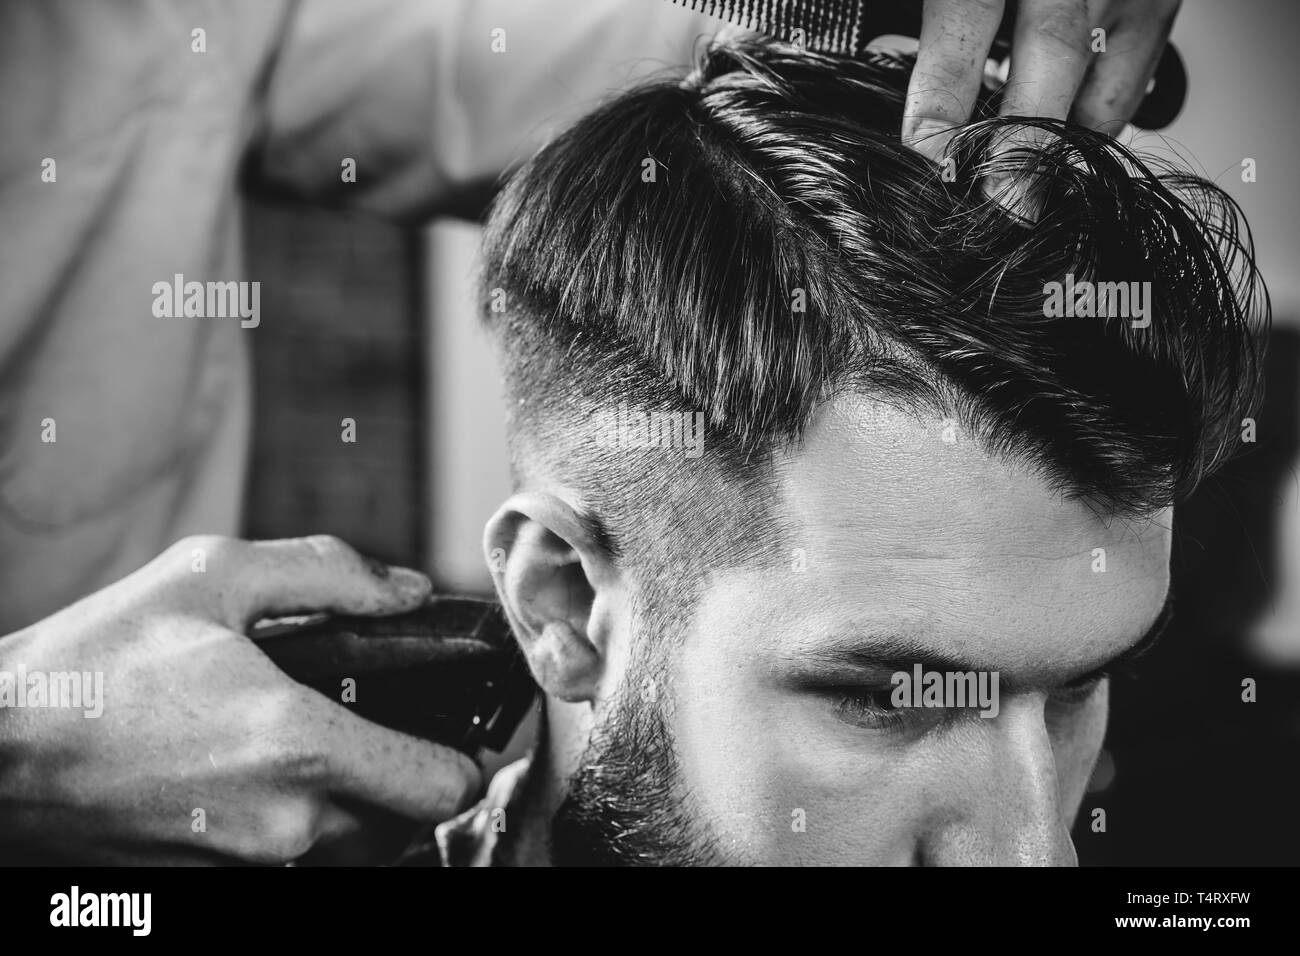 Young handsome barber making haircut for attractive bearded man at  barbershop. Black and white or colorless photo. Hairstyle, salon,  hairdresser, barber shop, lifestyle concept. Caucasian male models Stock  Photo - Alamy